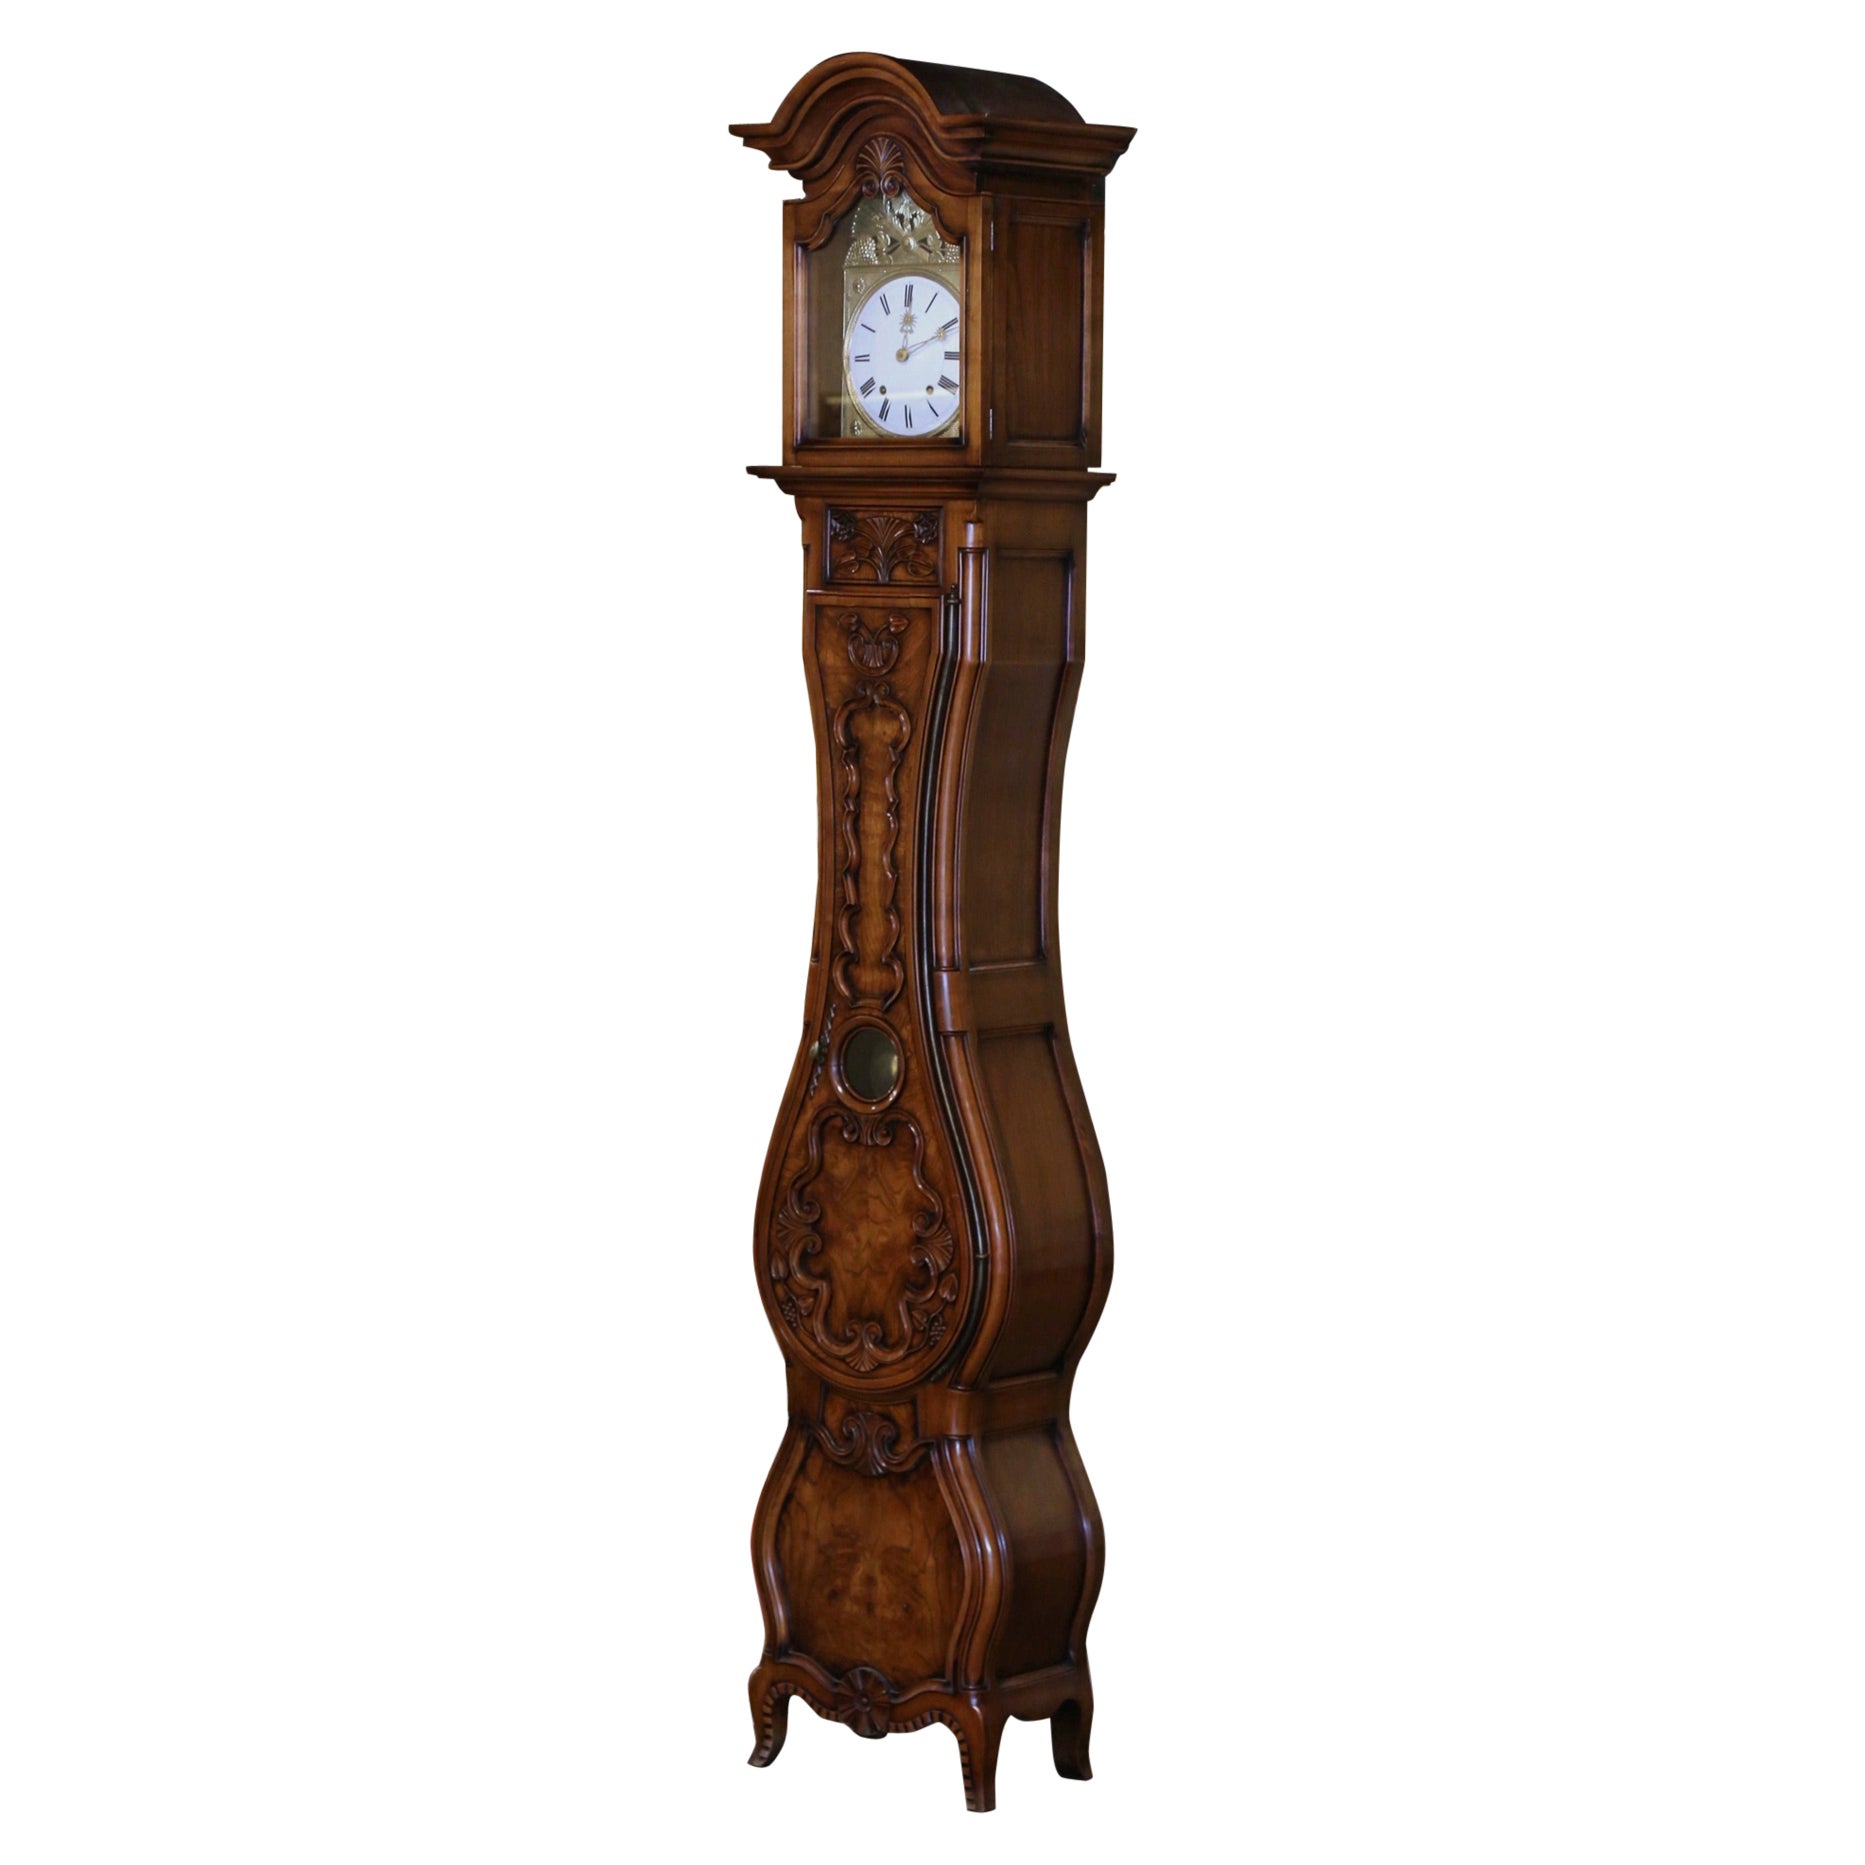 20th Century French Louis XV Carved Burl Wood Grandfather Clock from Lyon Region